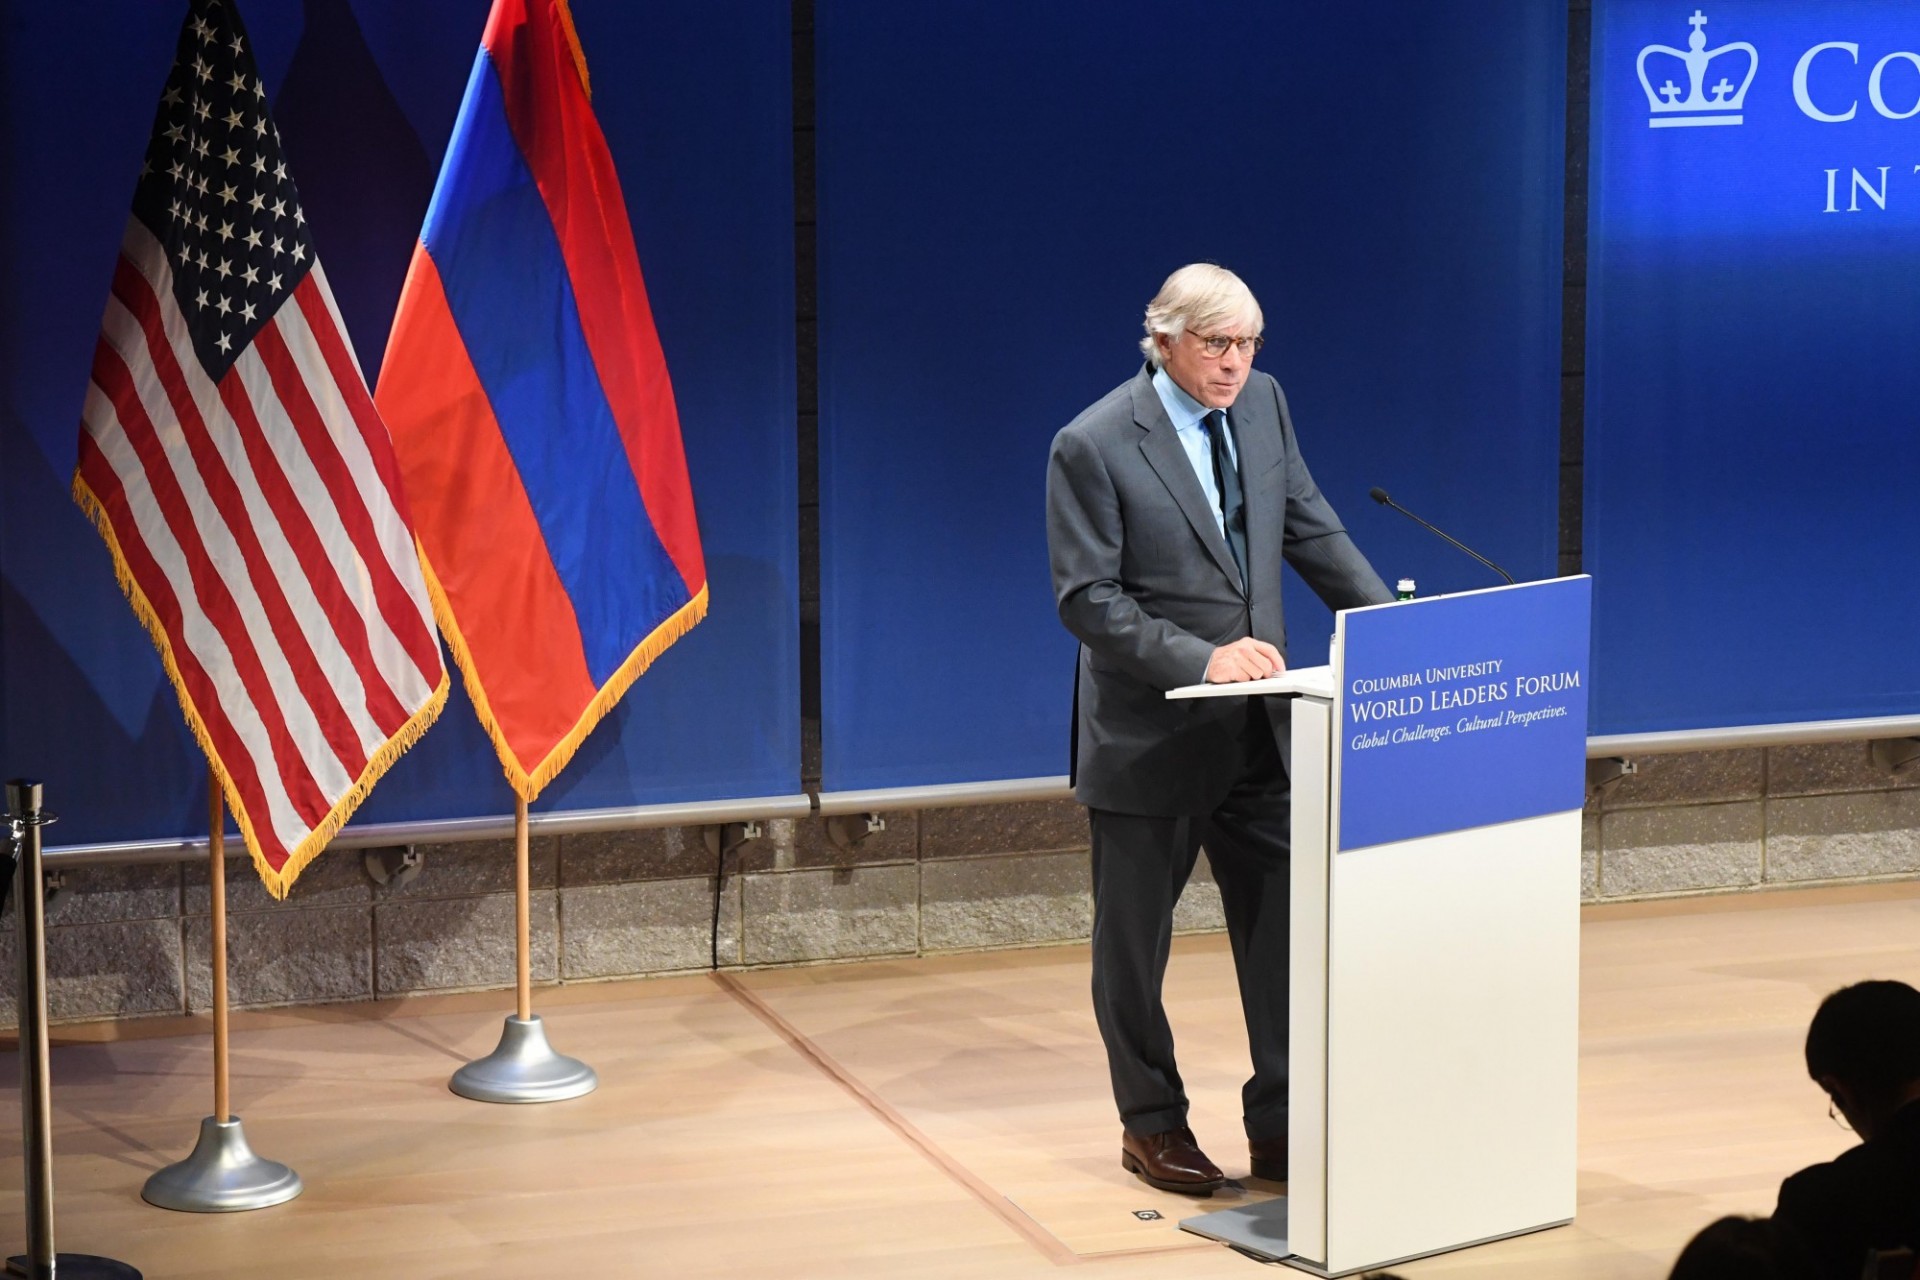 Lee C. Bollinger, President, Columbia University in the City of New York begins the World Leaders Forum with an introduction of Prime Minister Nikol Pashinyan of Armenia.